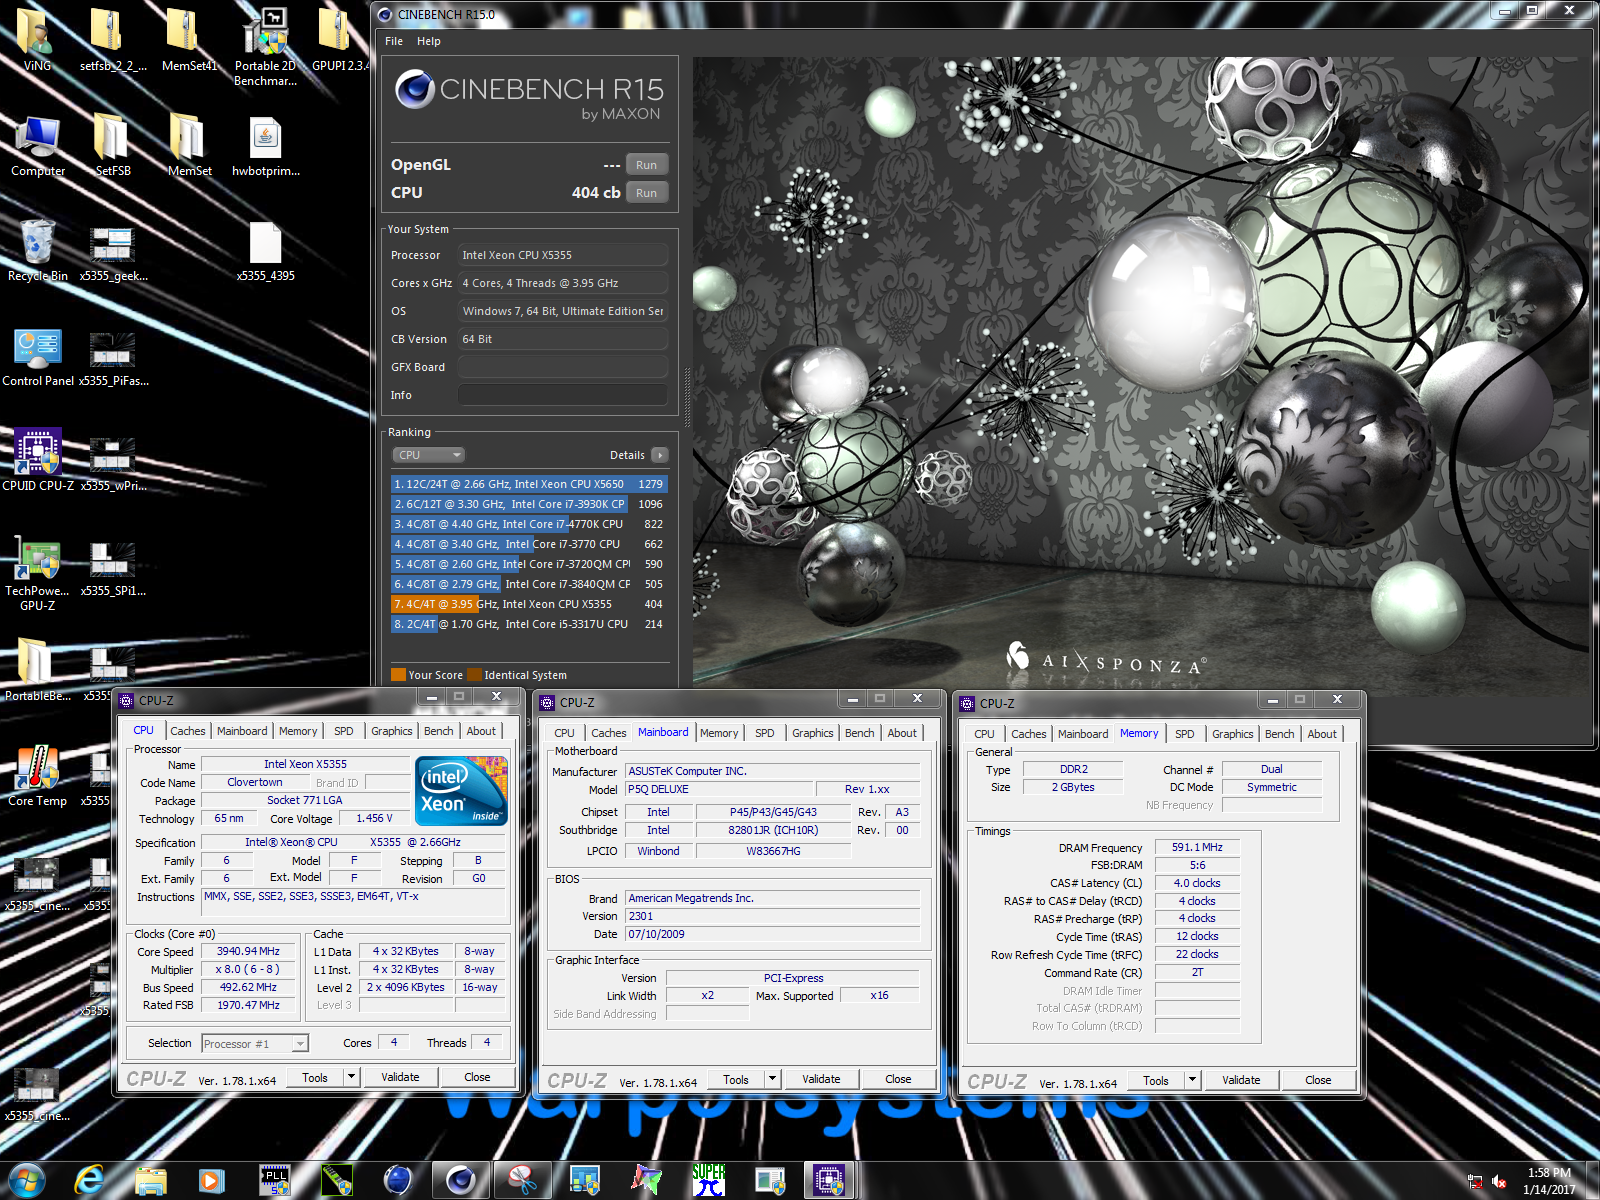 ViNG`s Cinebench - R15 score: 404 cb with a Xeon X5355